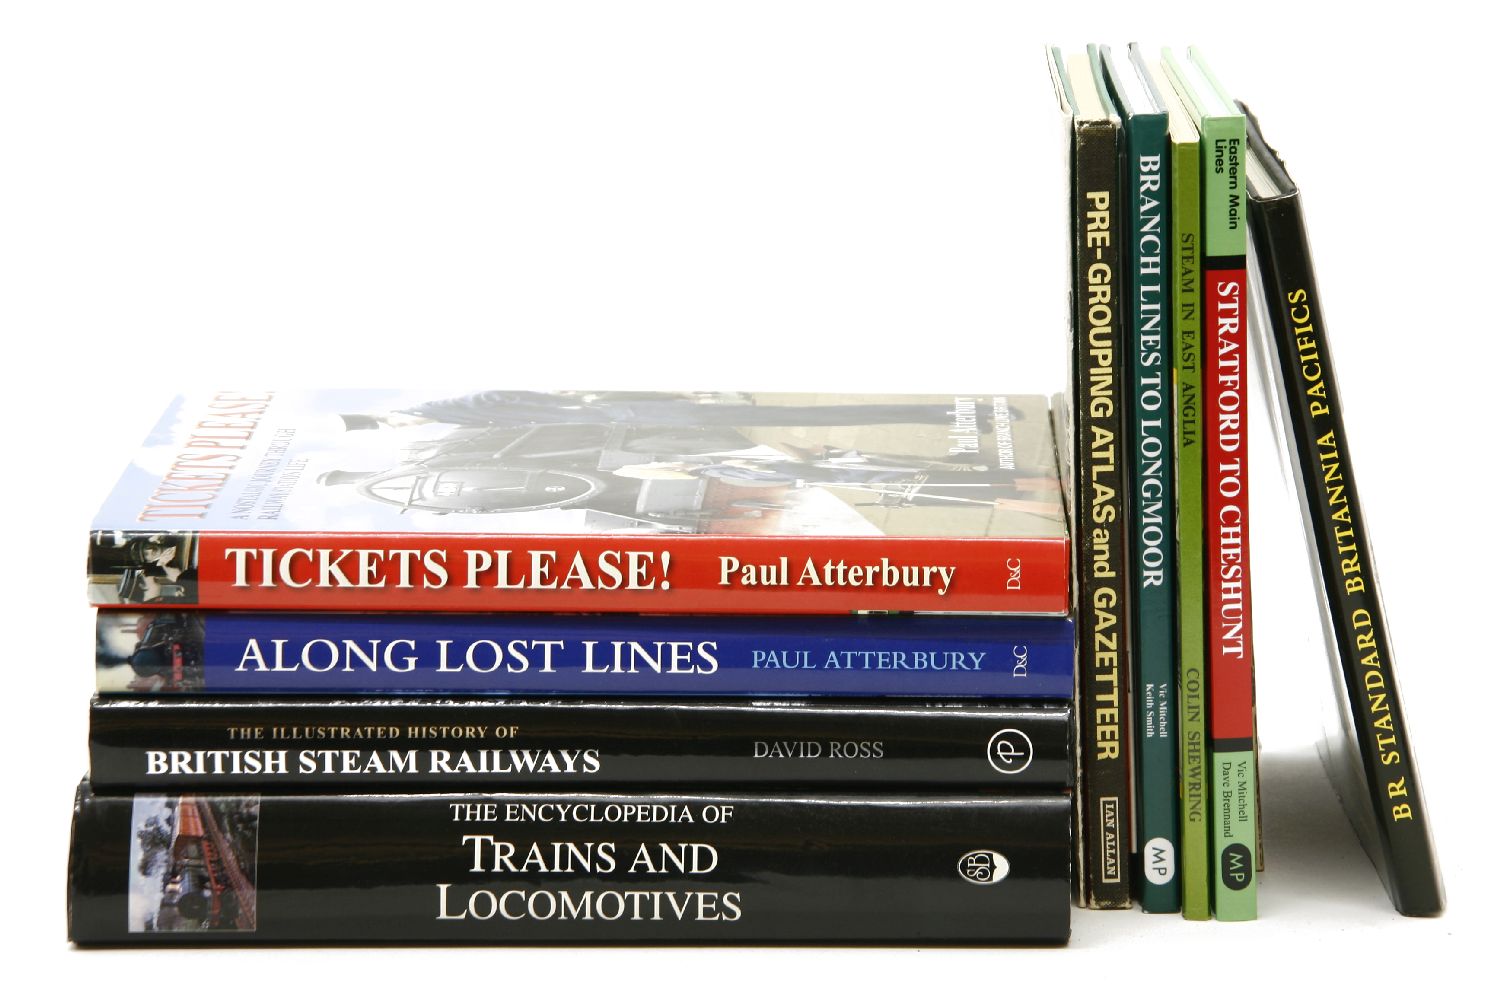 A collection of books on 'transport' to include railway steam trains, vintage cars and mortorcycles